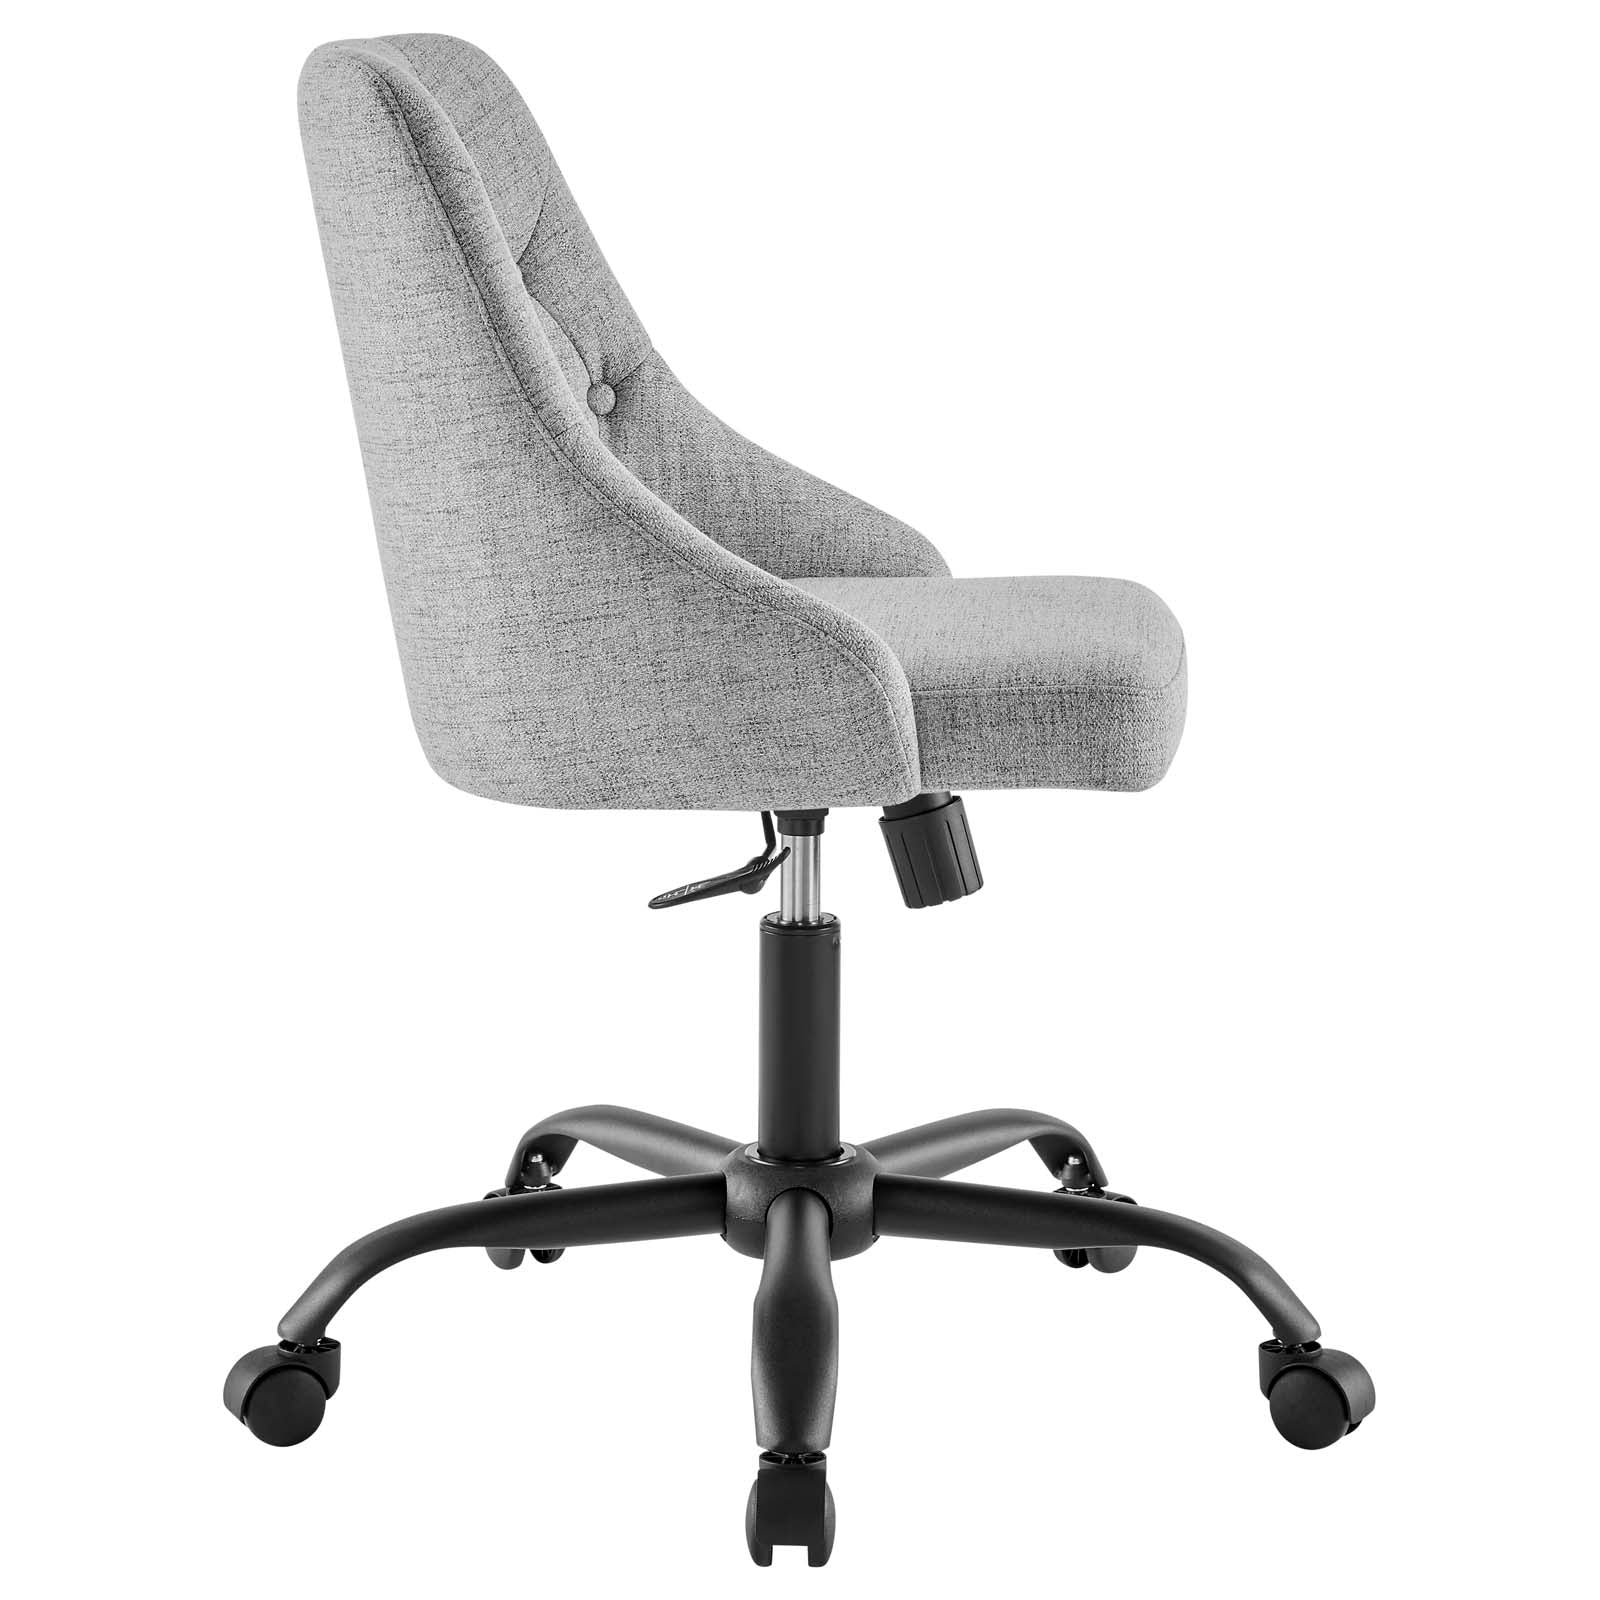 Modway Task Chairs - Distinct Tufted Swivel Upholstered Office Chair Black Light Gray